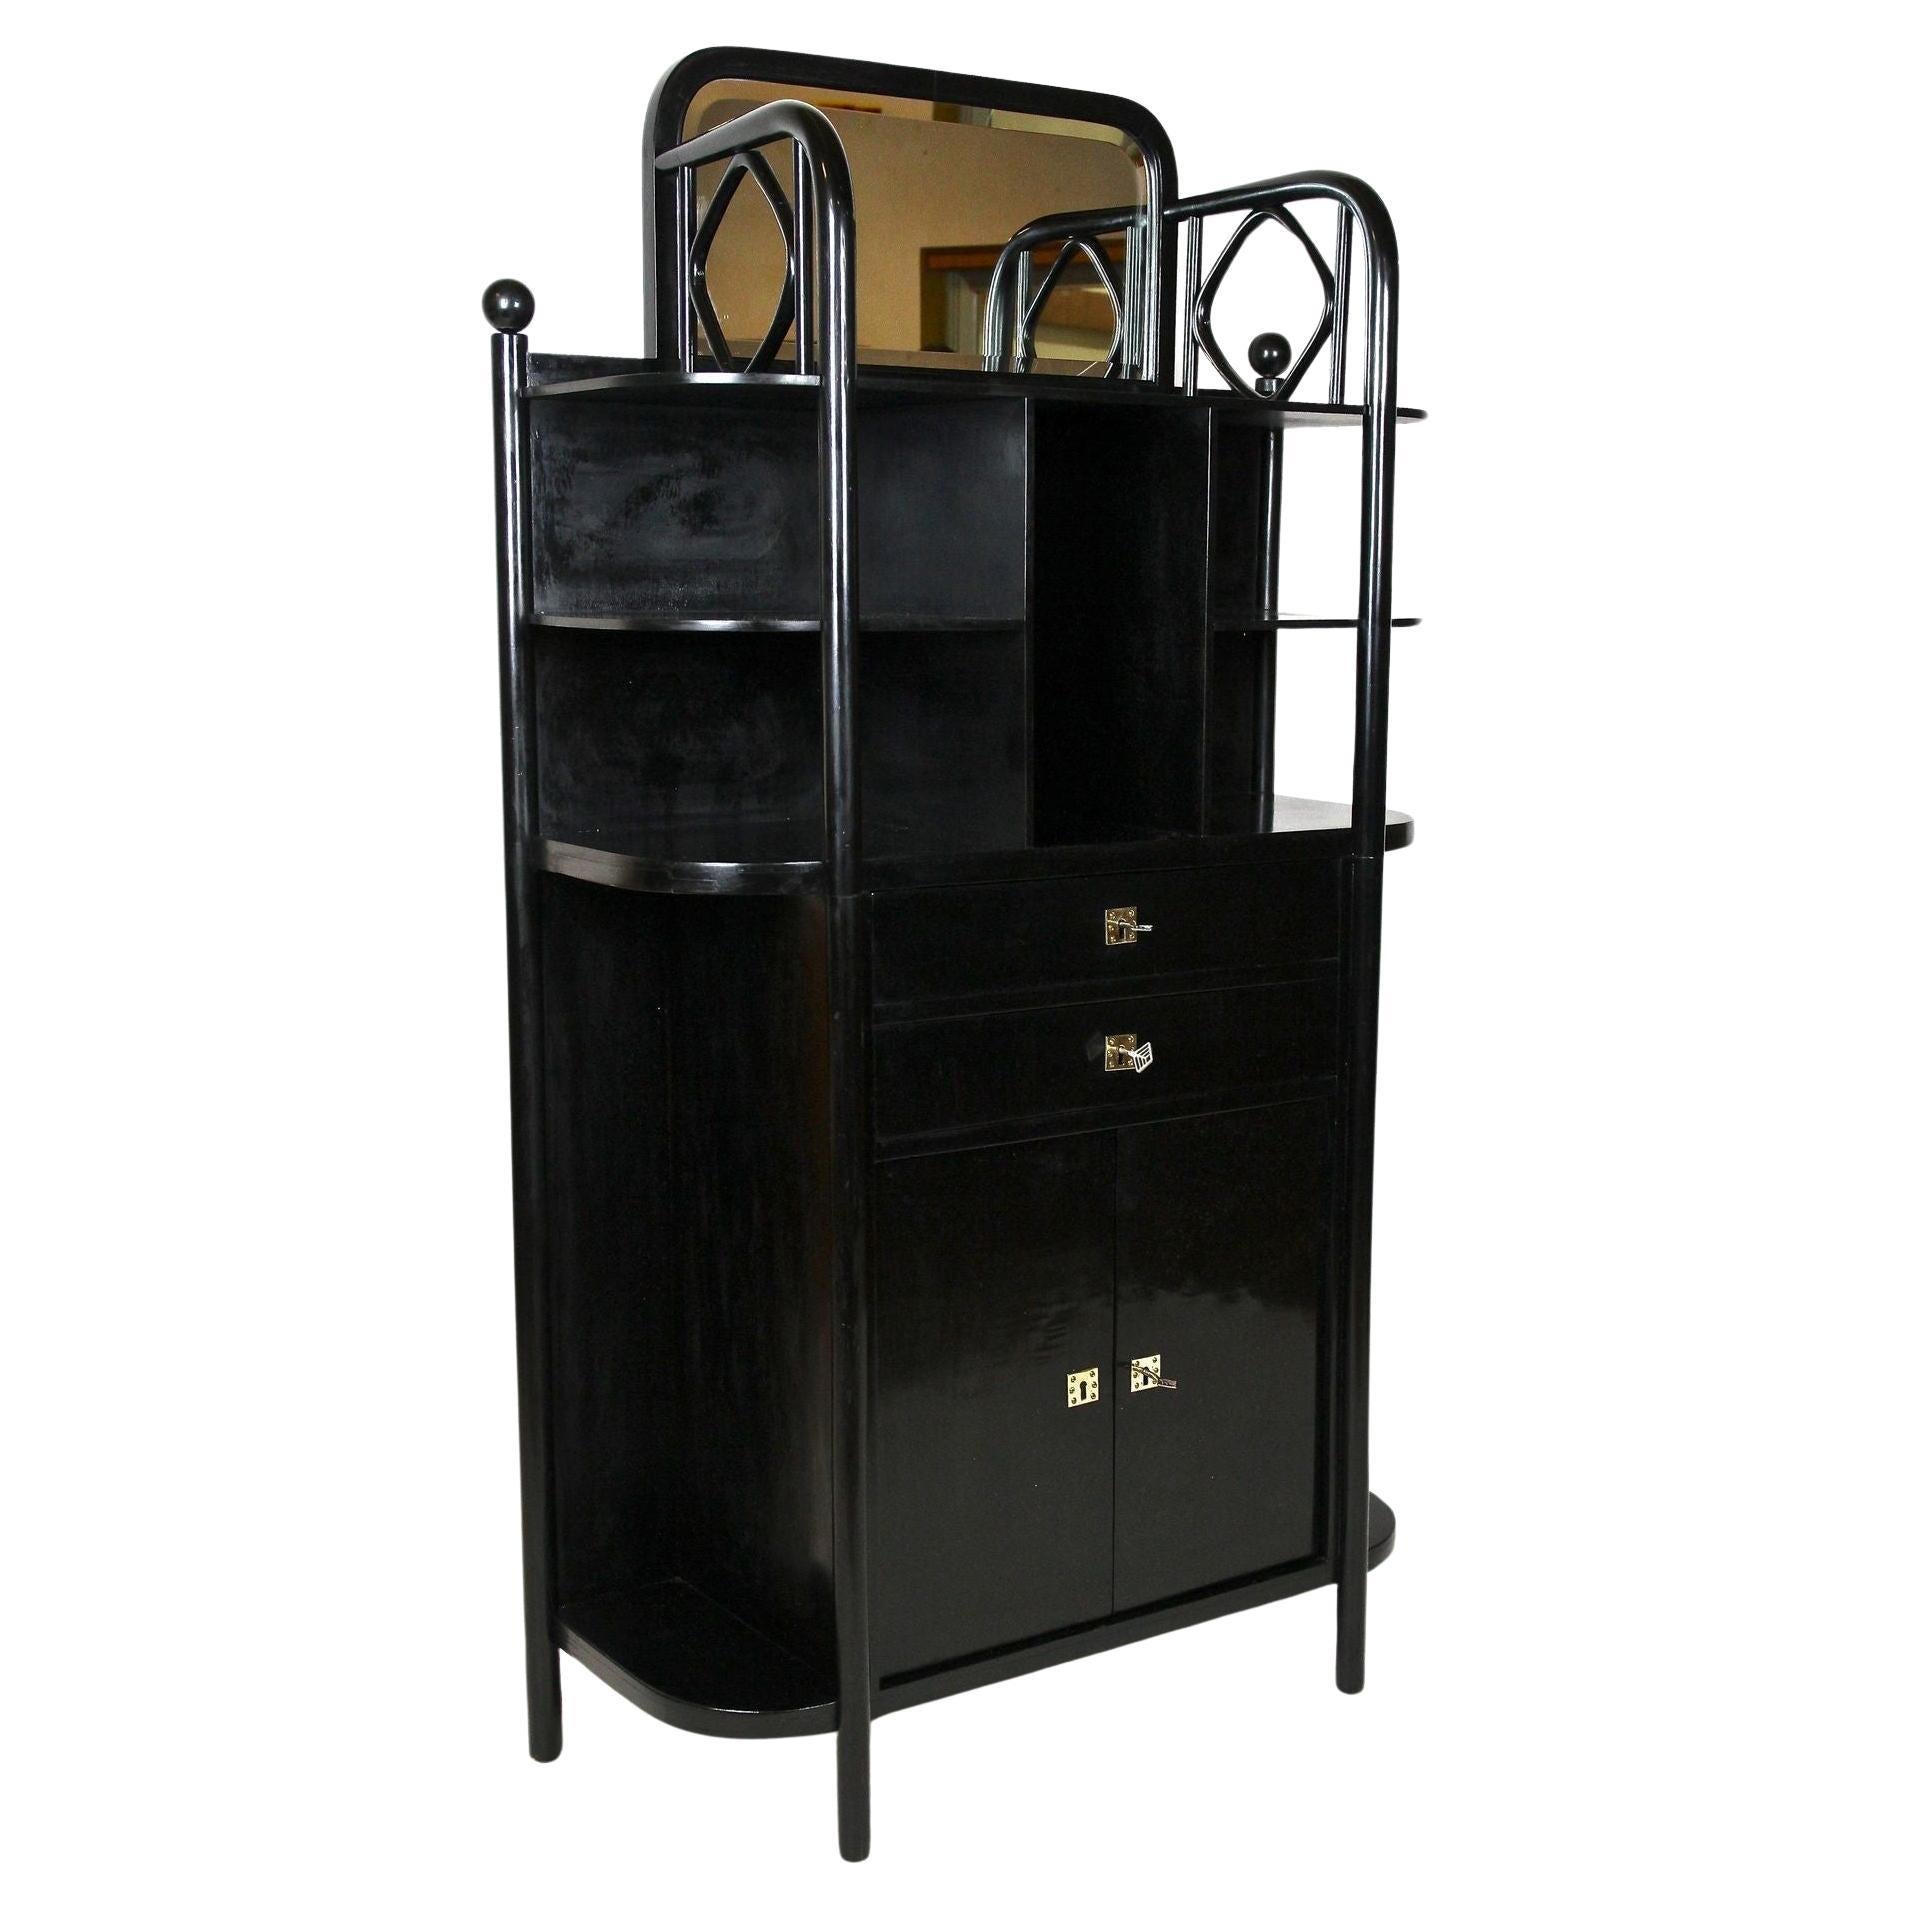 Black Art Nouveau Display Cabinet by Josef Hoffmann for Thonet, AT ca. 1905 For Sale